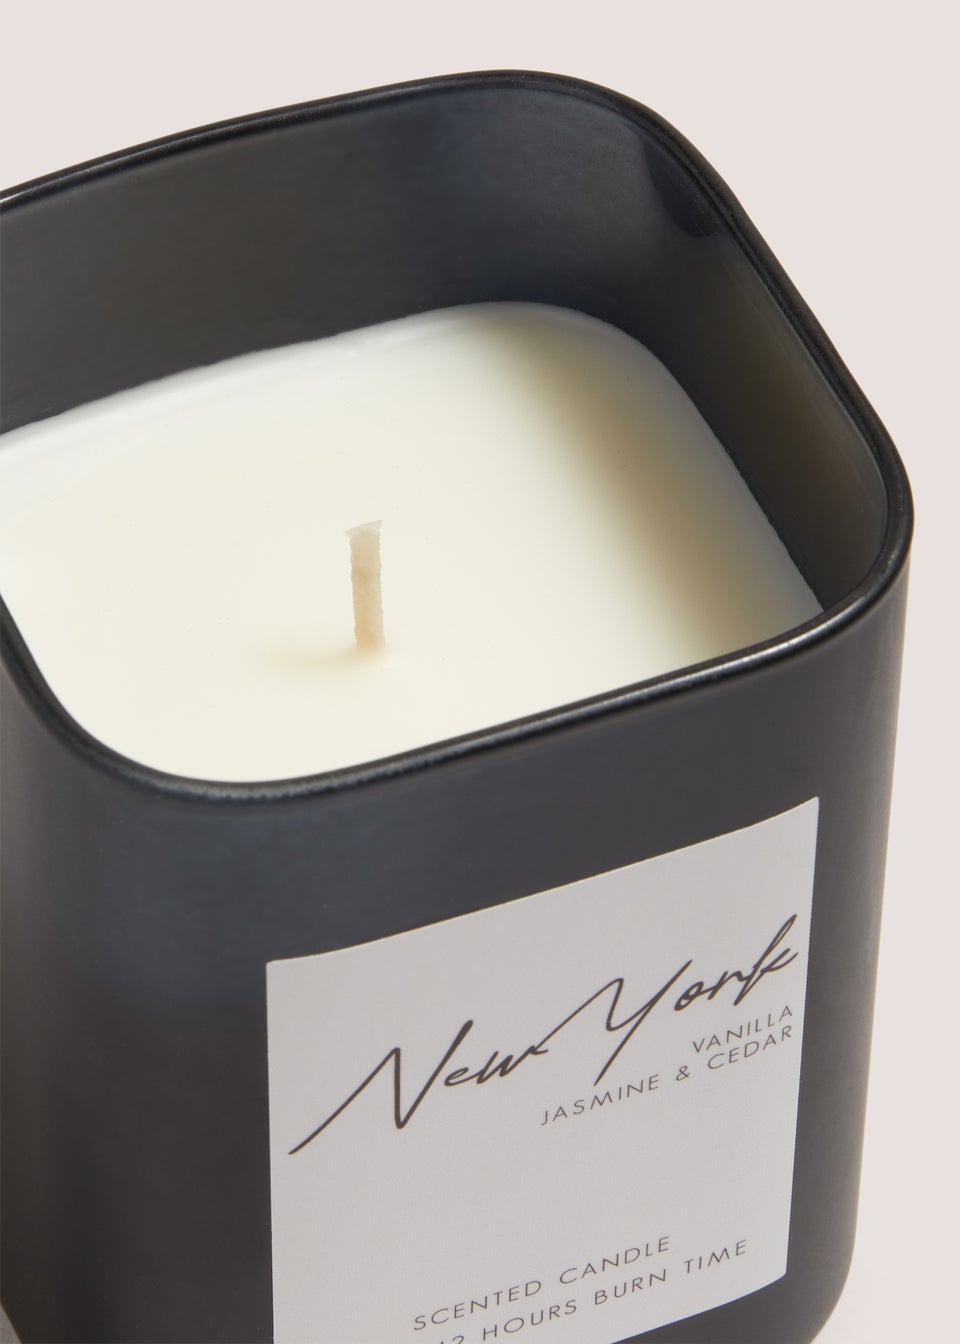 New York Scented Candle